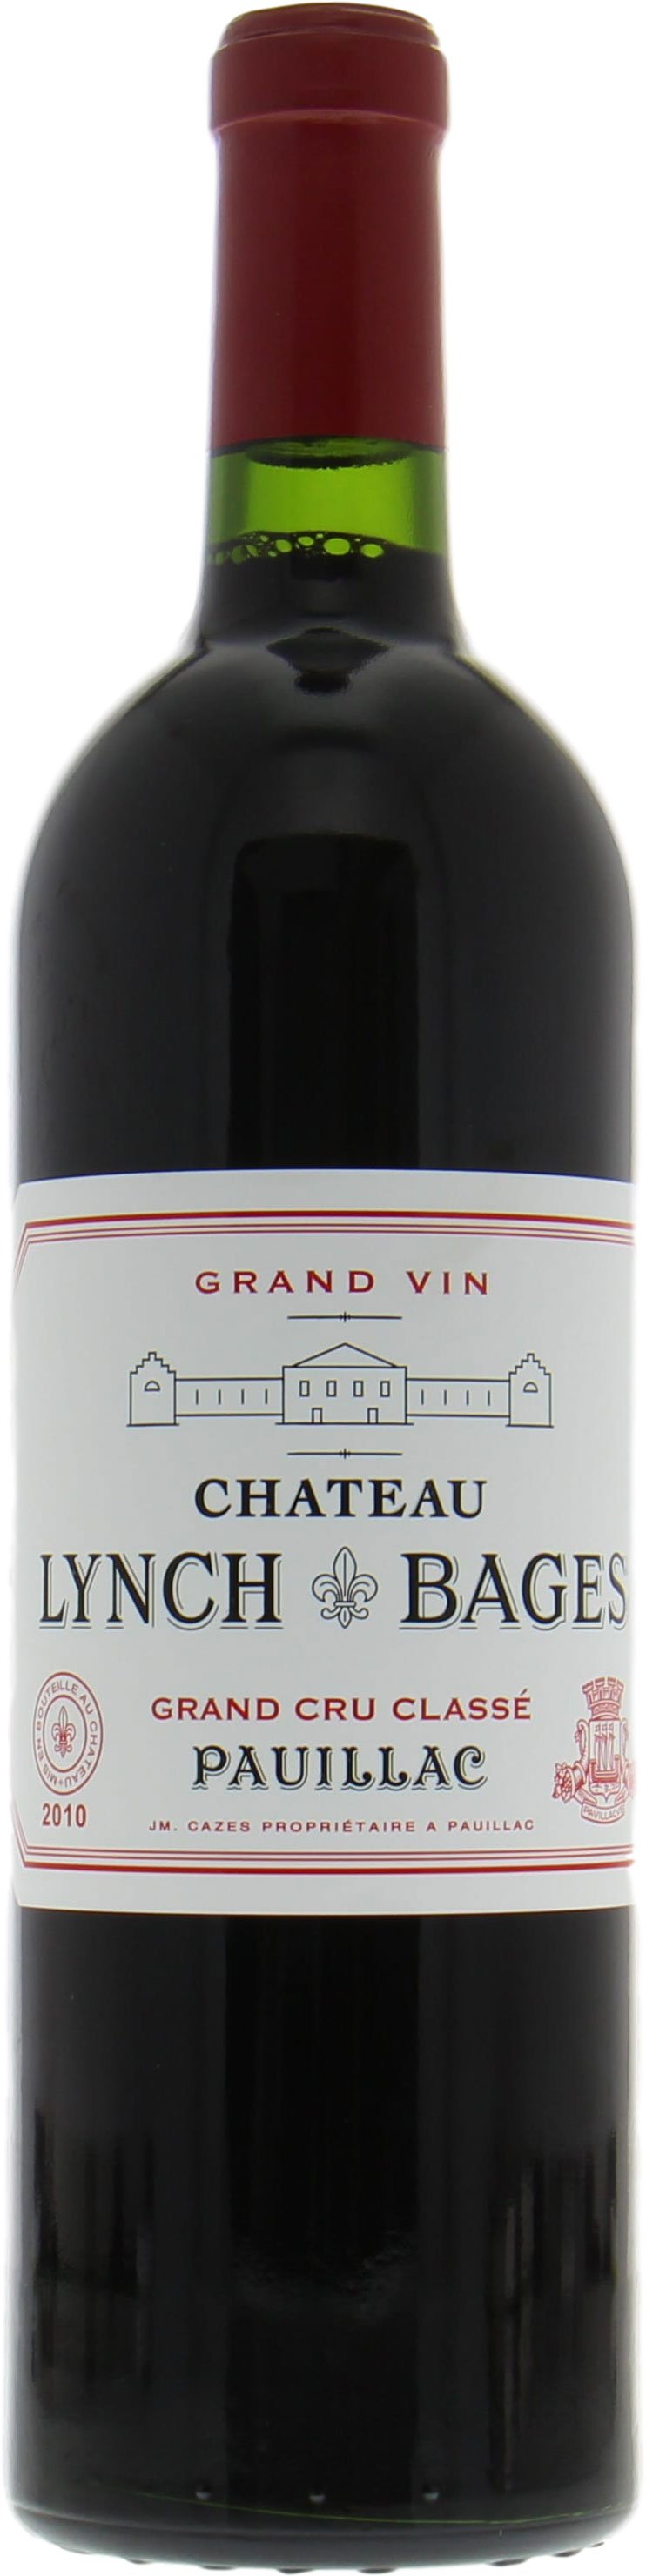 Chateau Lynch Bages - Chateau Lynch Bages 2010